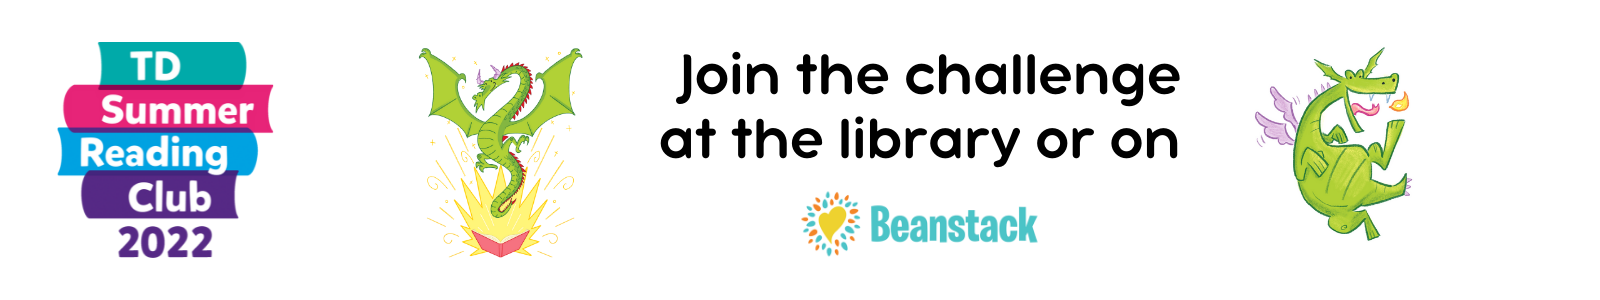 TDSRC Join the Challenge at the library or on Beanstack!